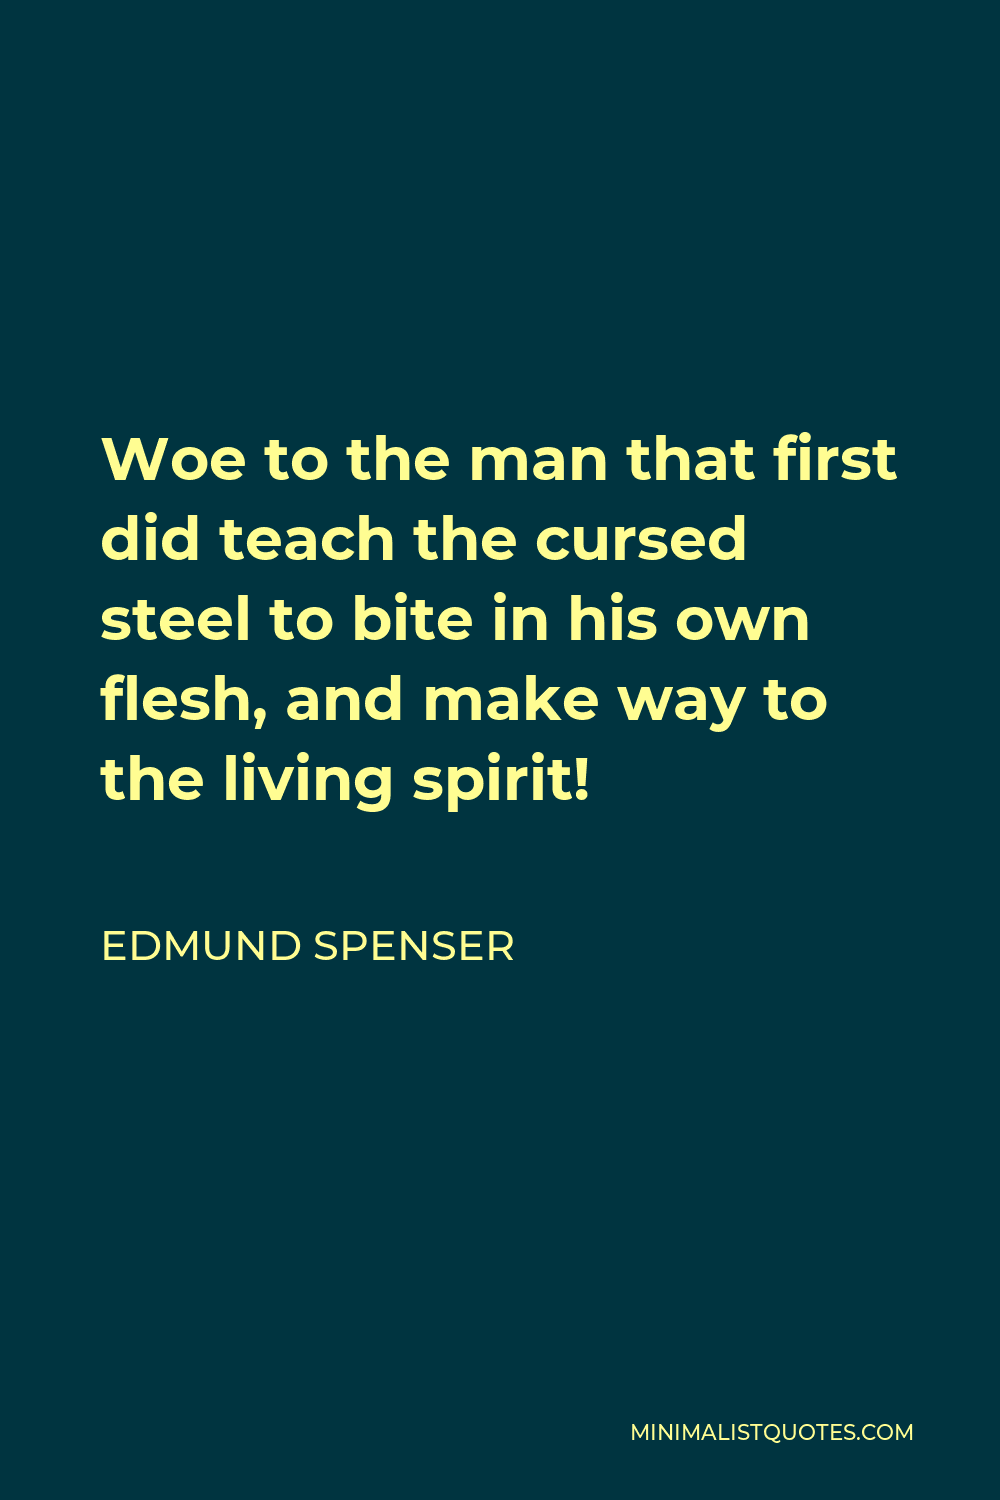 Edmund Spenser Quote - Woe to the man that first did teach the cursed steel to bite in his own flesh, and make way to the living spirit!